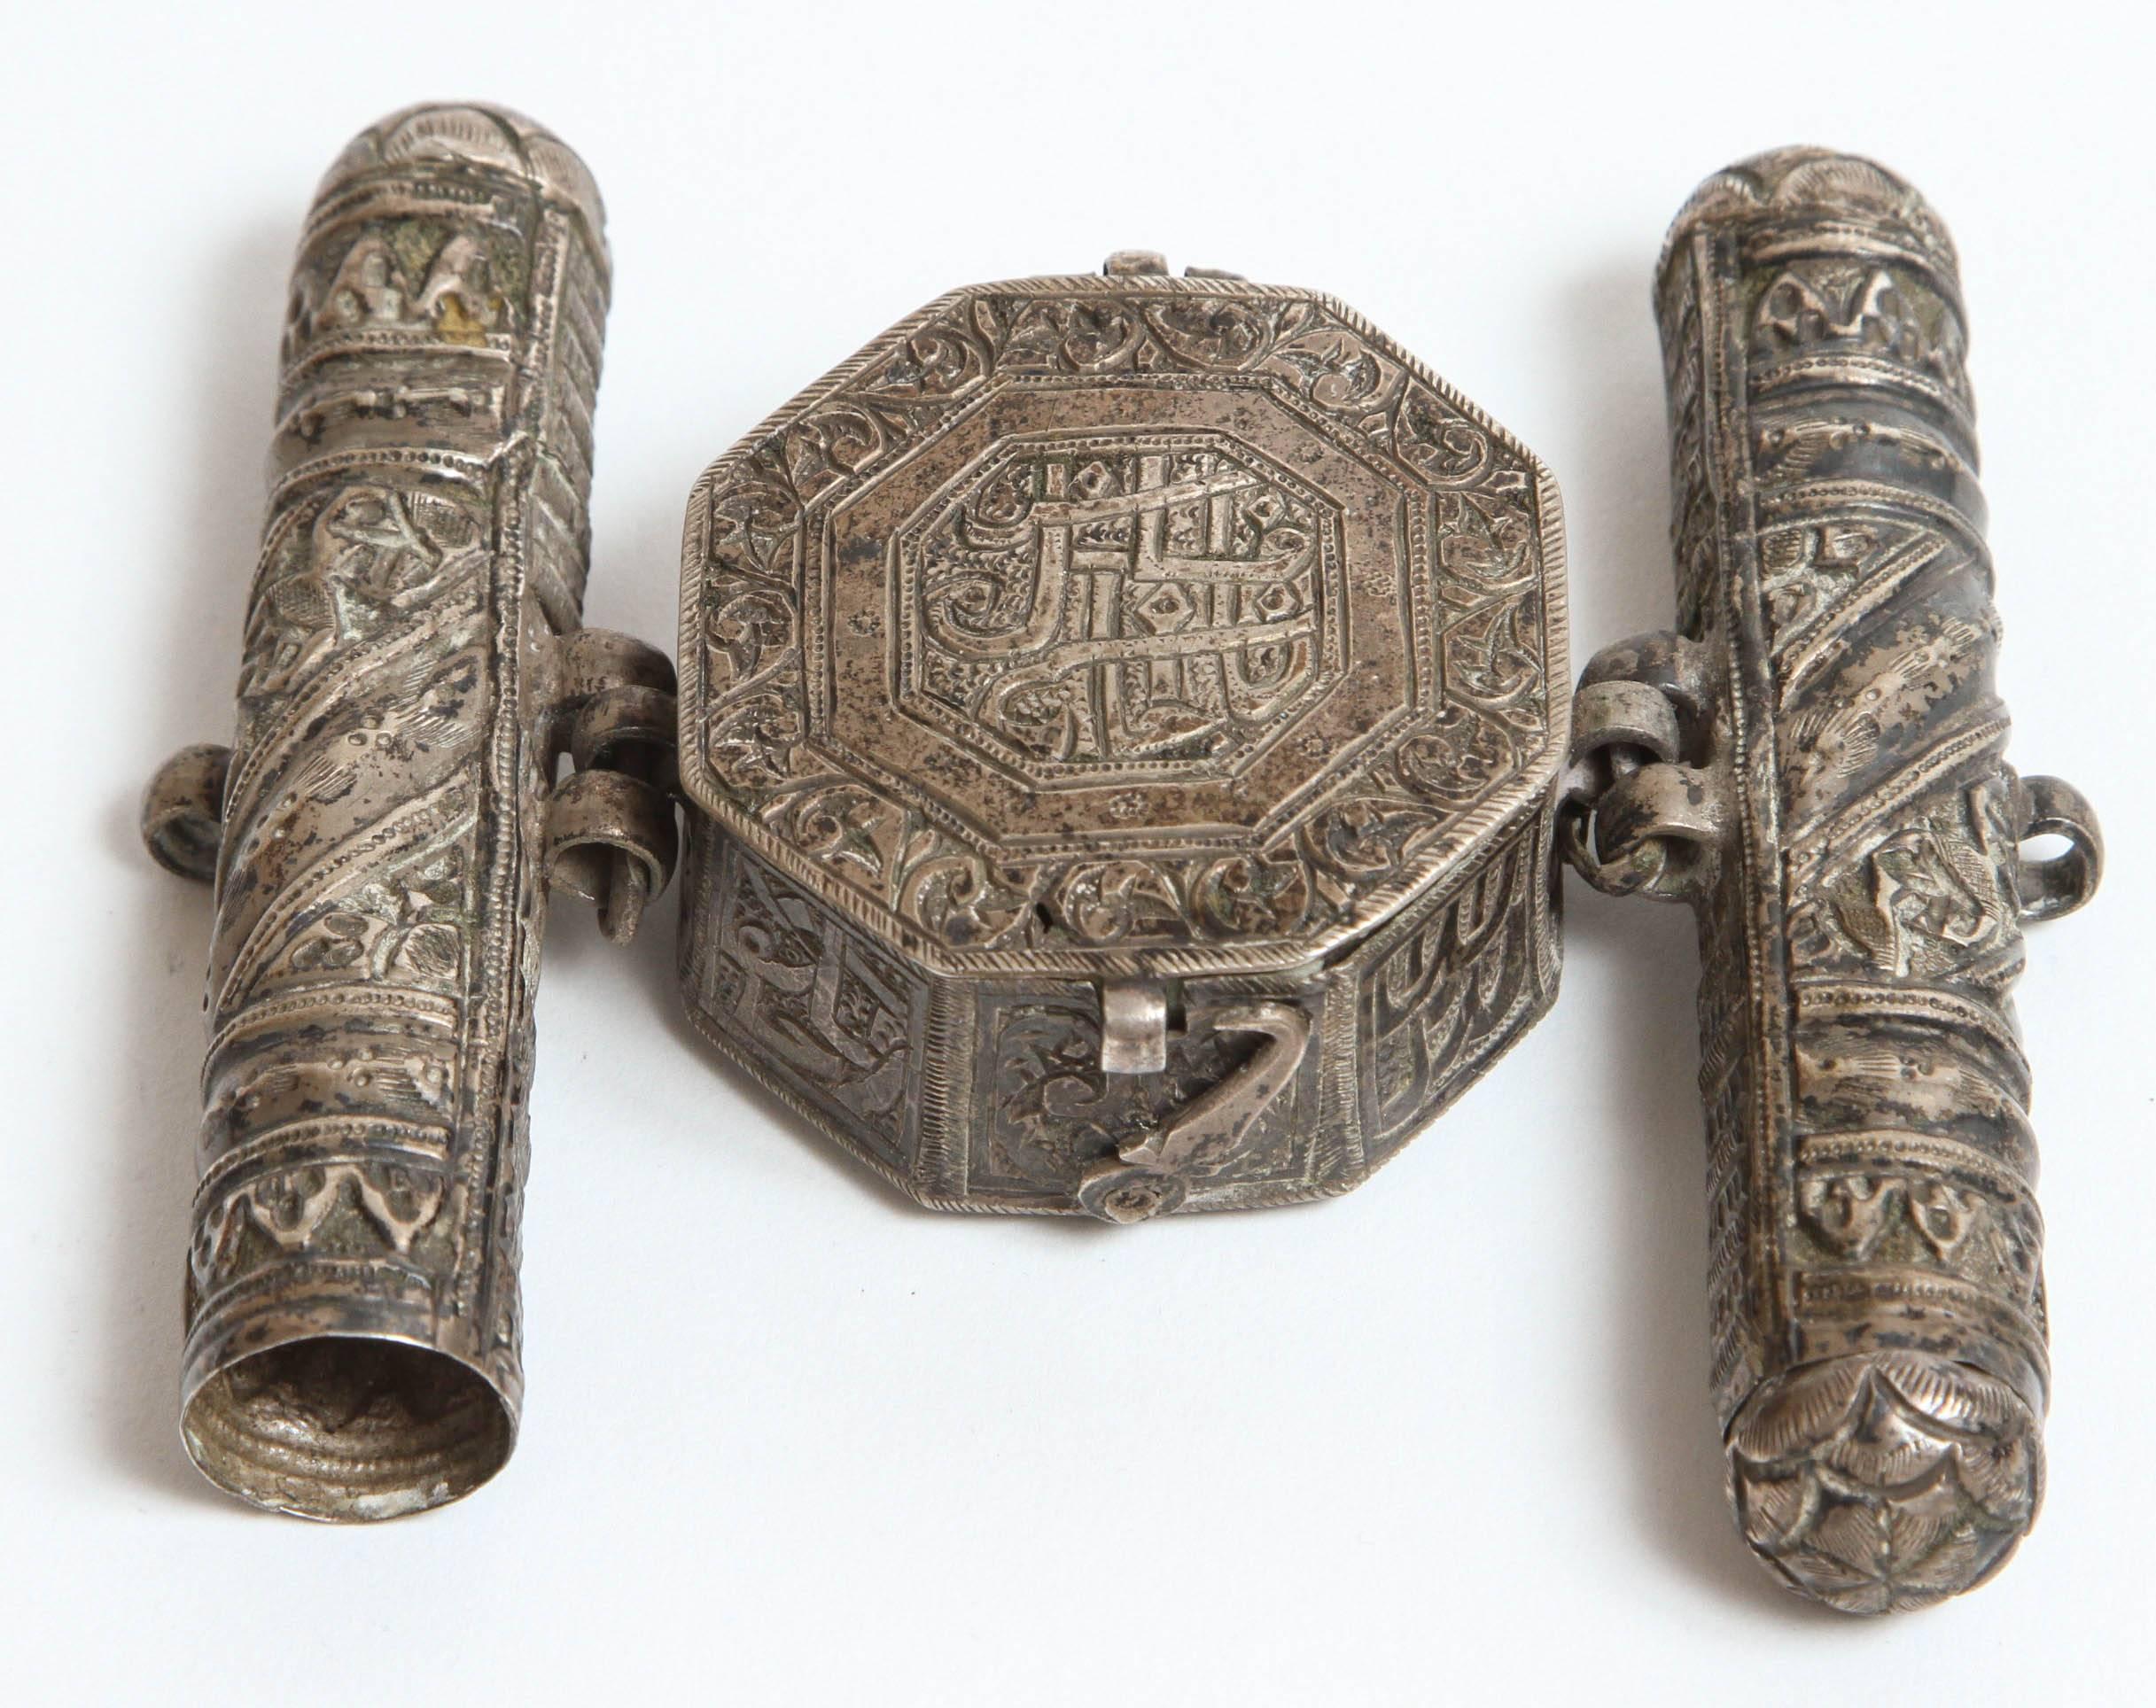 19th century three part, silver repousse, octagonal talisman miniature Koran case which would have stored select verses of the Koran Revelation considered to hold special protective powers.
A latch at the bottom opens the hinged box. 
Decorated